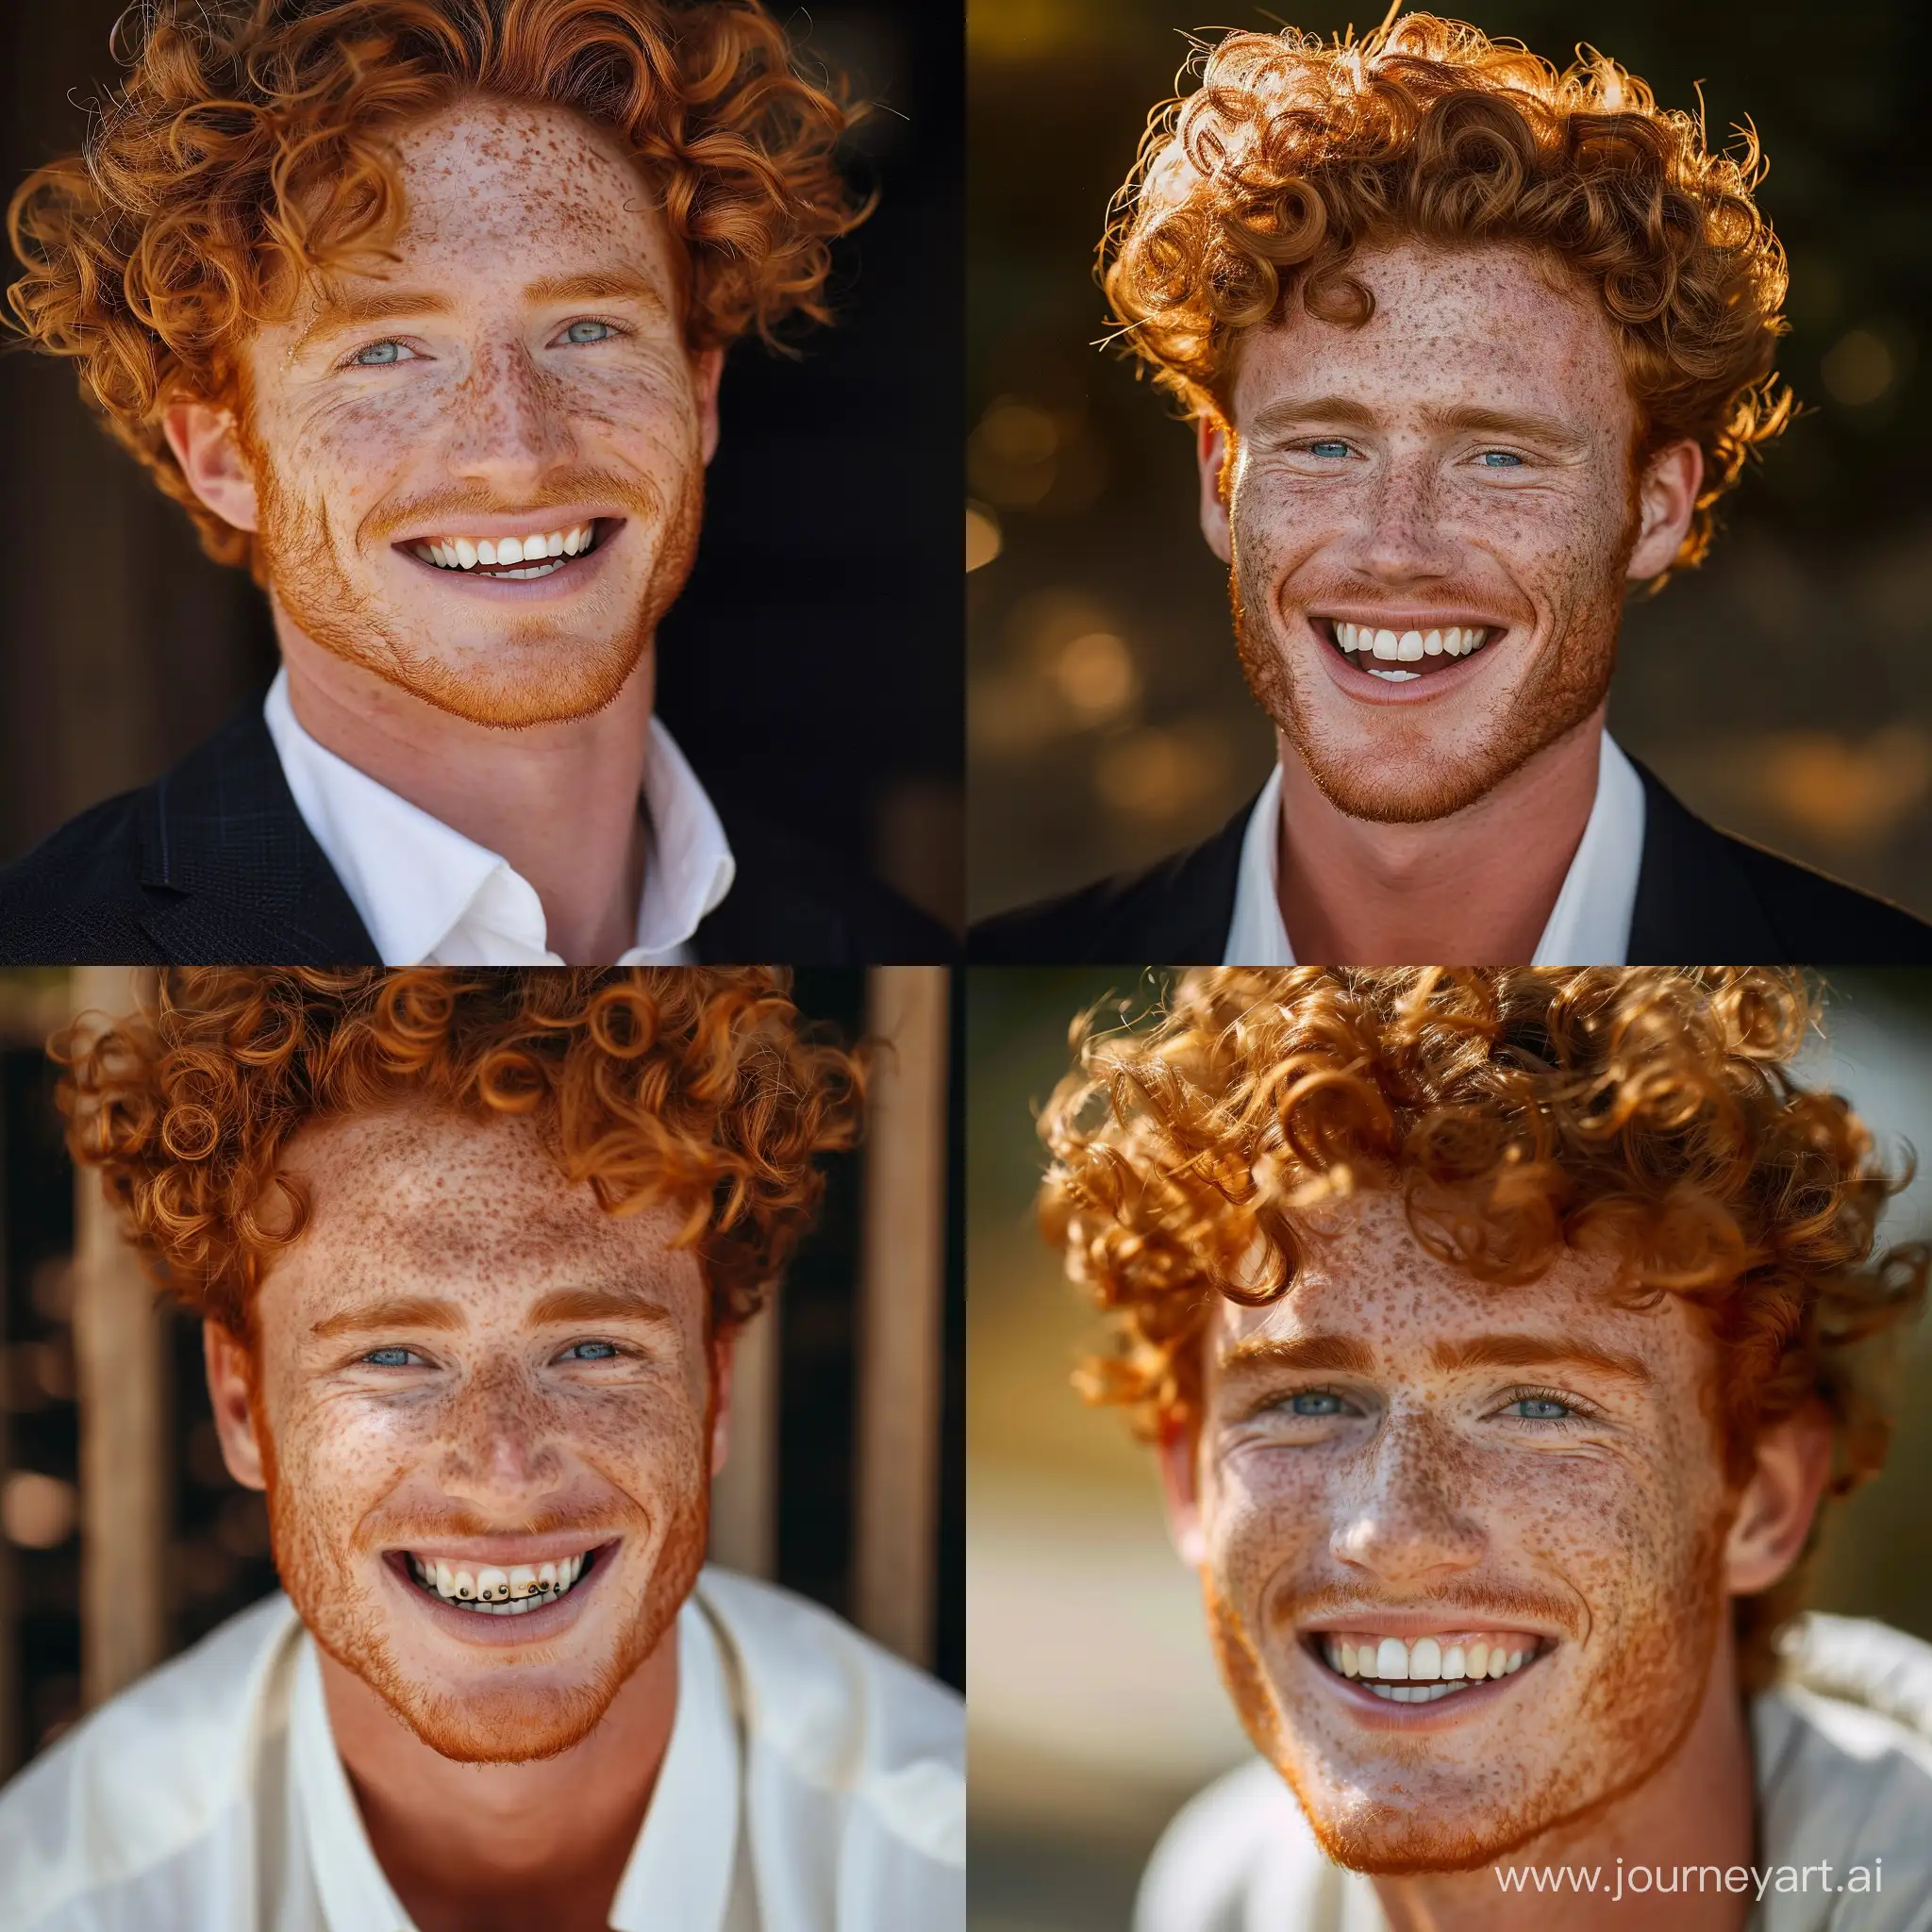 Stylish-Man-with-Curly-Red-Hair-Advertisement-for-Full-Height